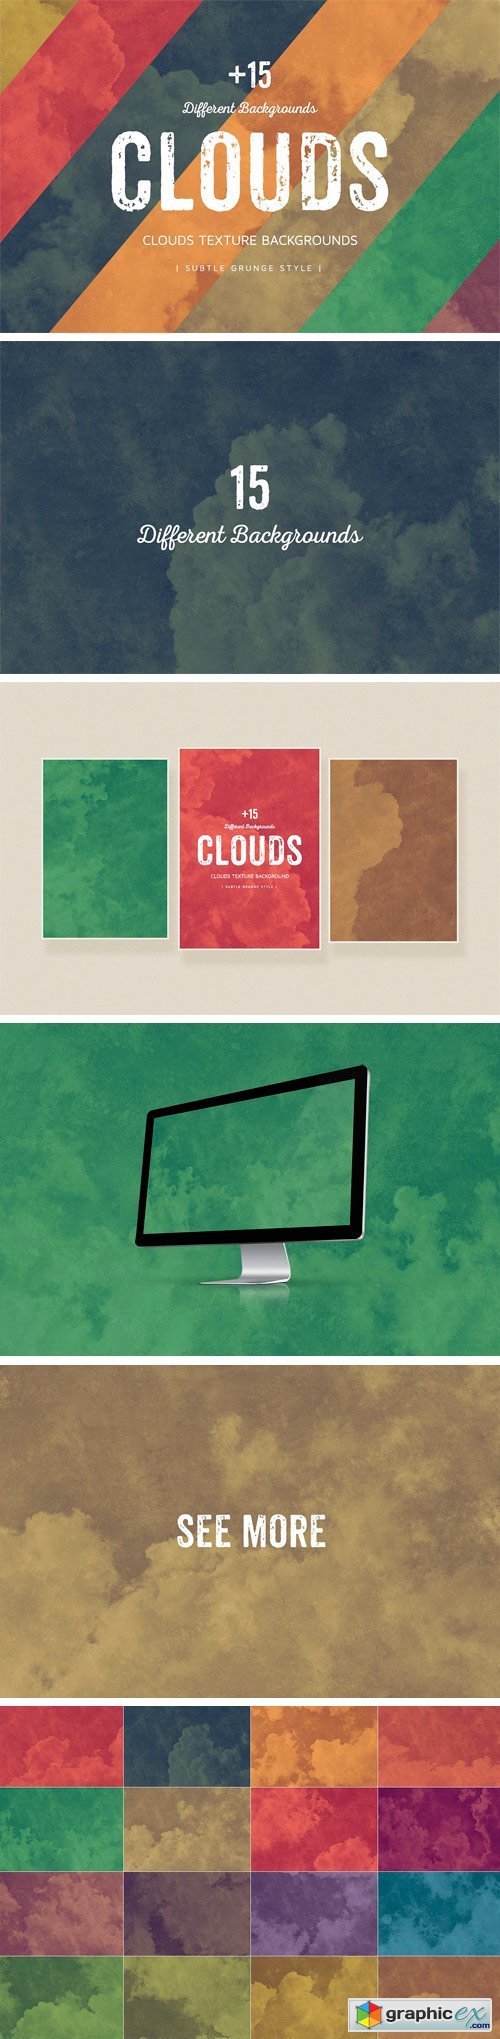 Clouds Texture Backgrounds